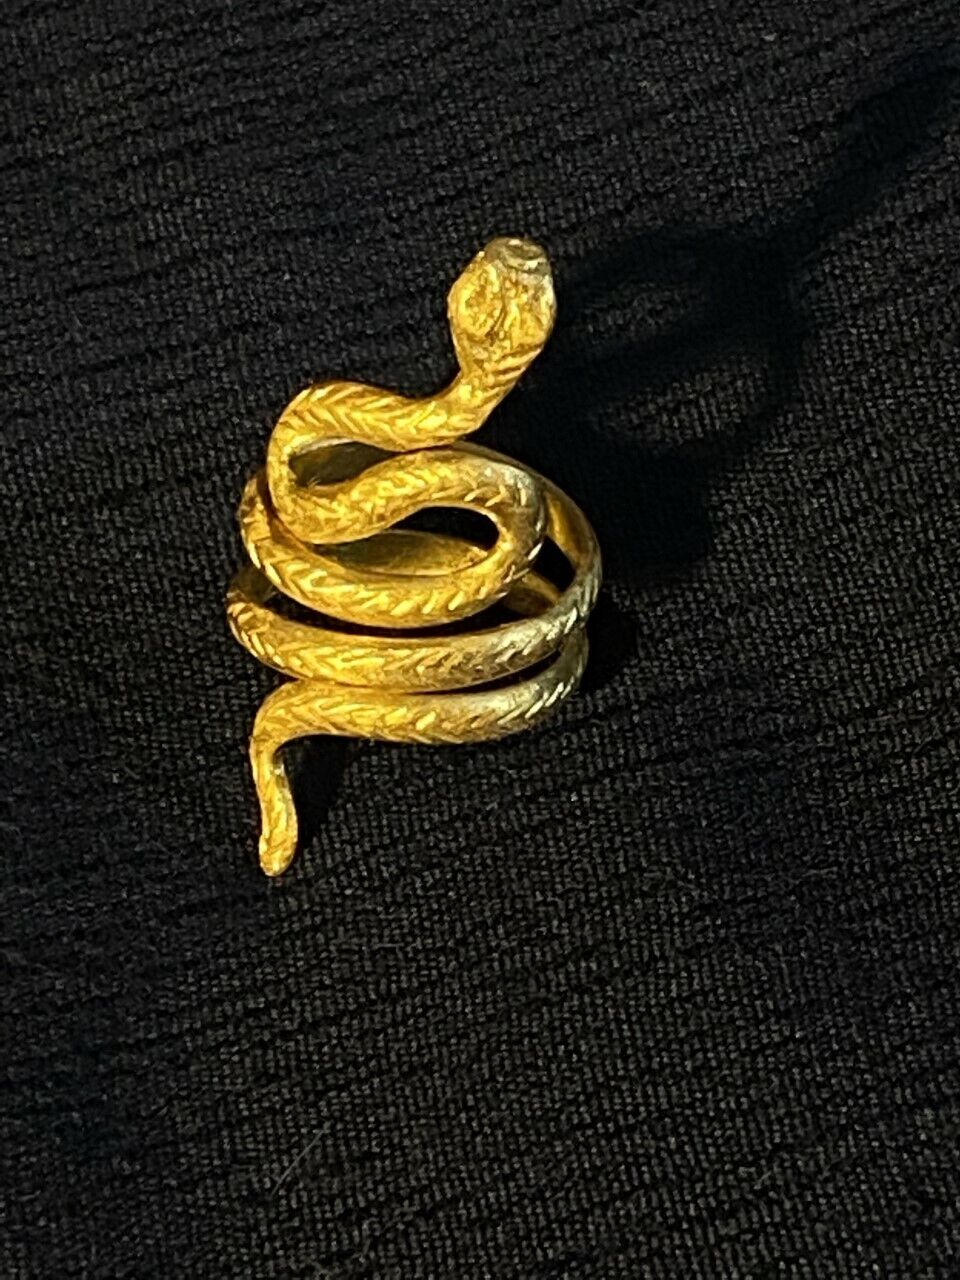 Roman Solid Gold Snake Finger Ring, c.1st-2nd Century A.D Ancient Jewelry